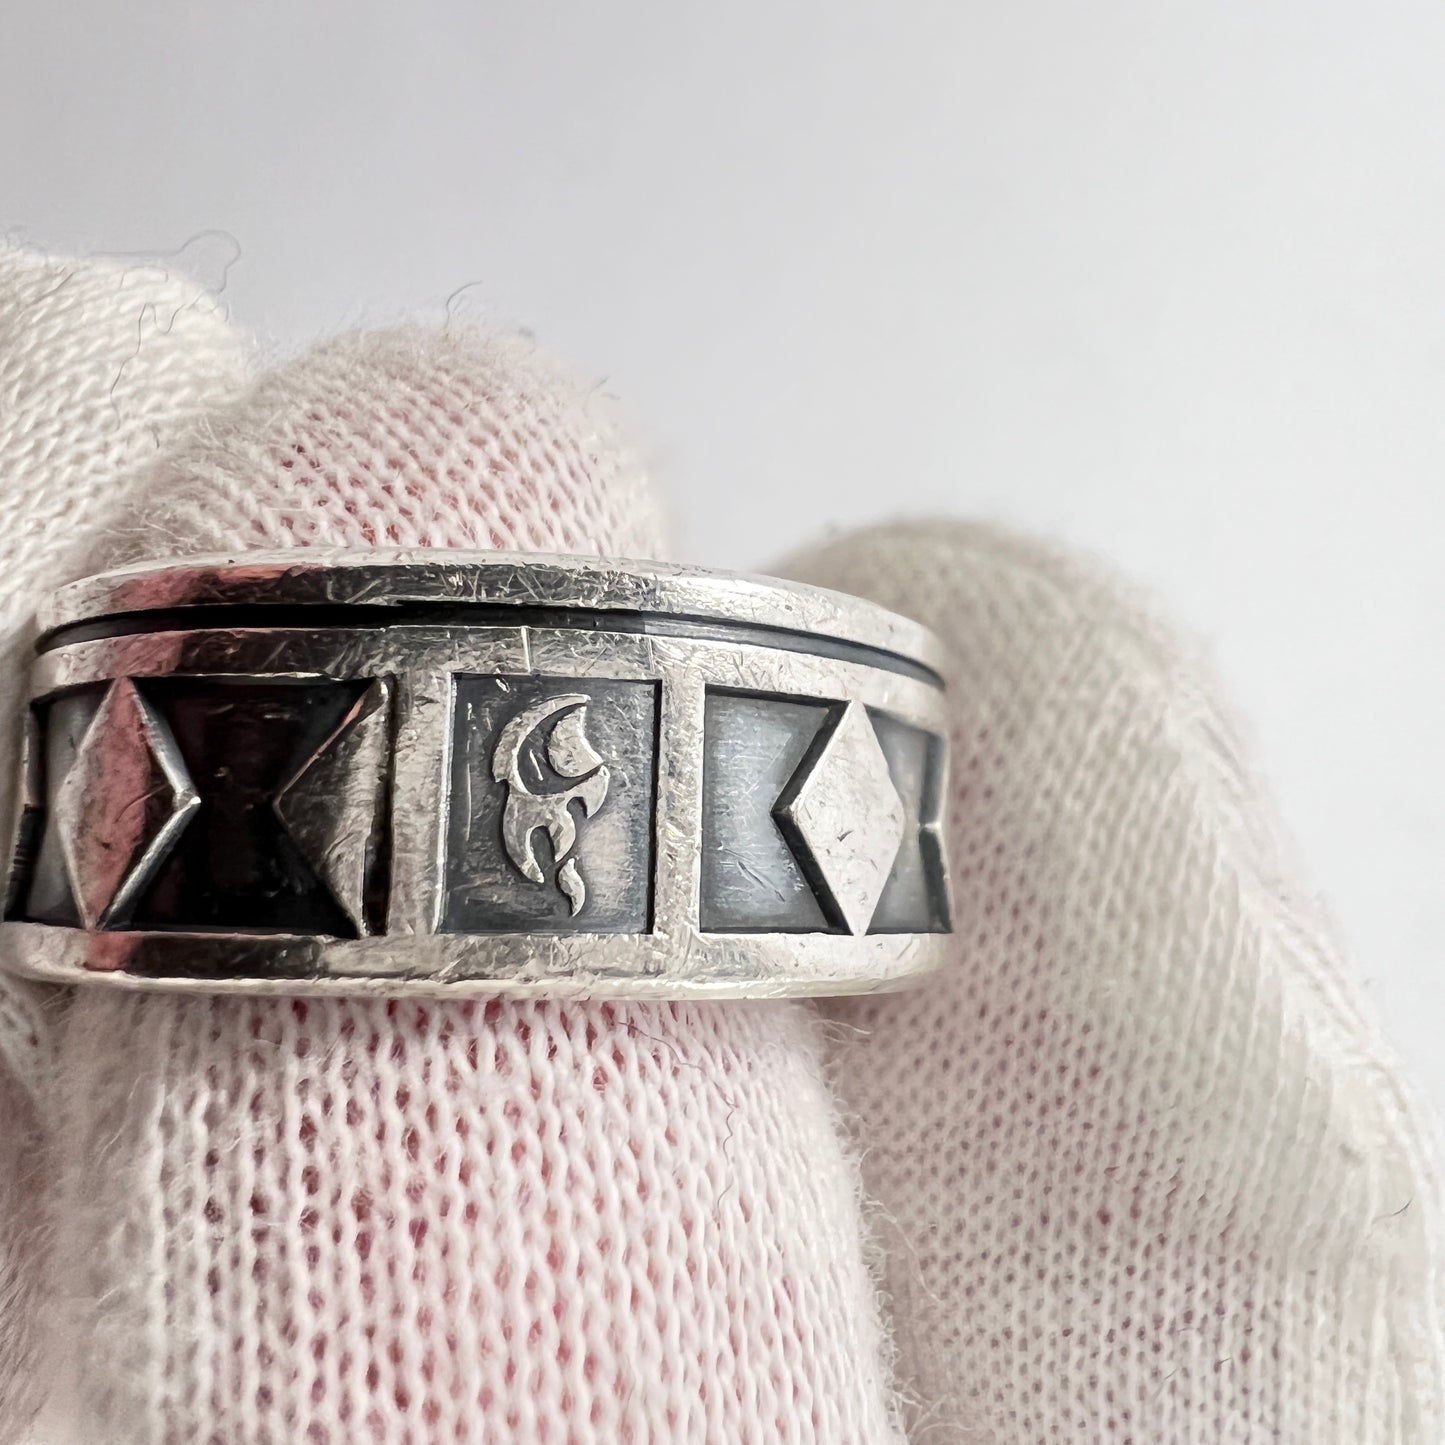 Uusitaito Oy, Finland. Vintage Chunky Sterling Silver Unisex Ring.